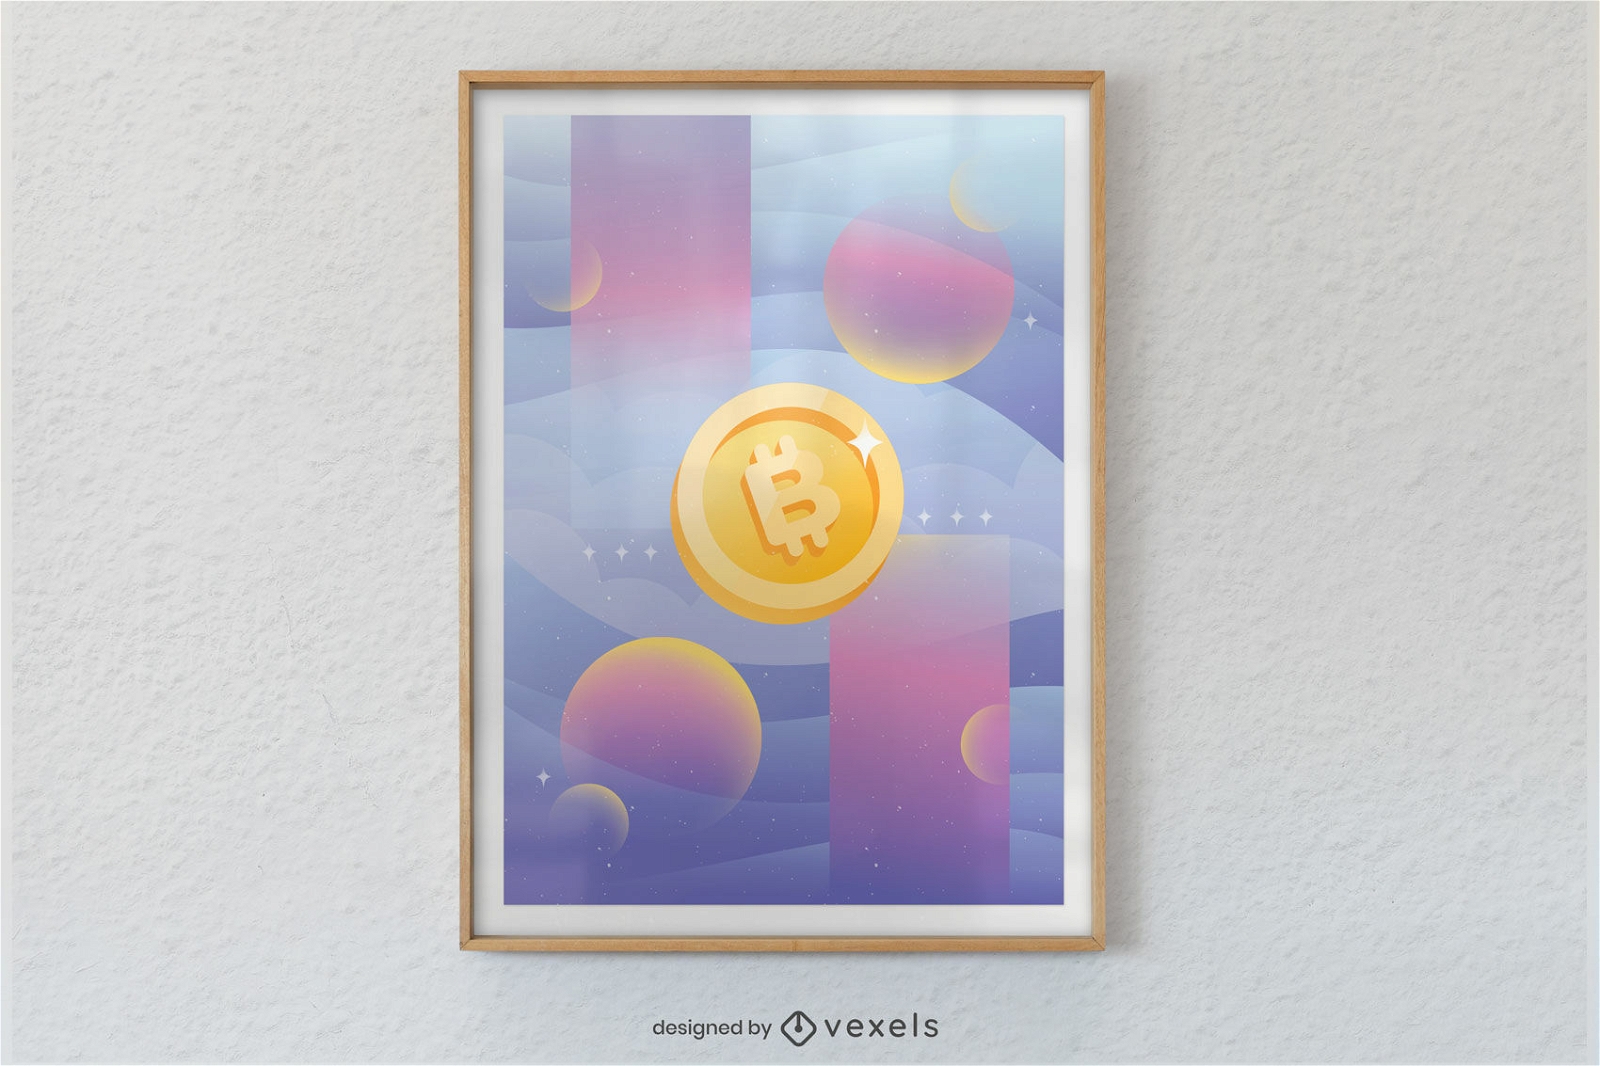 Cryptocurrency logo floating in space poster design